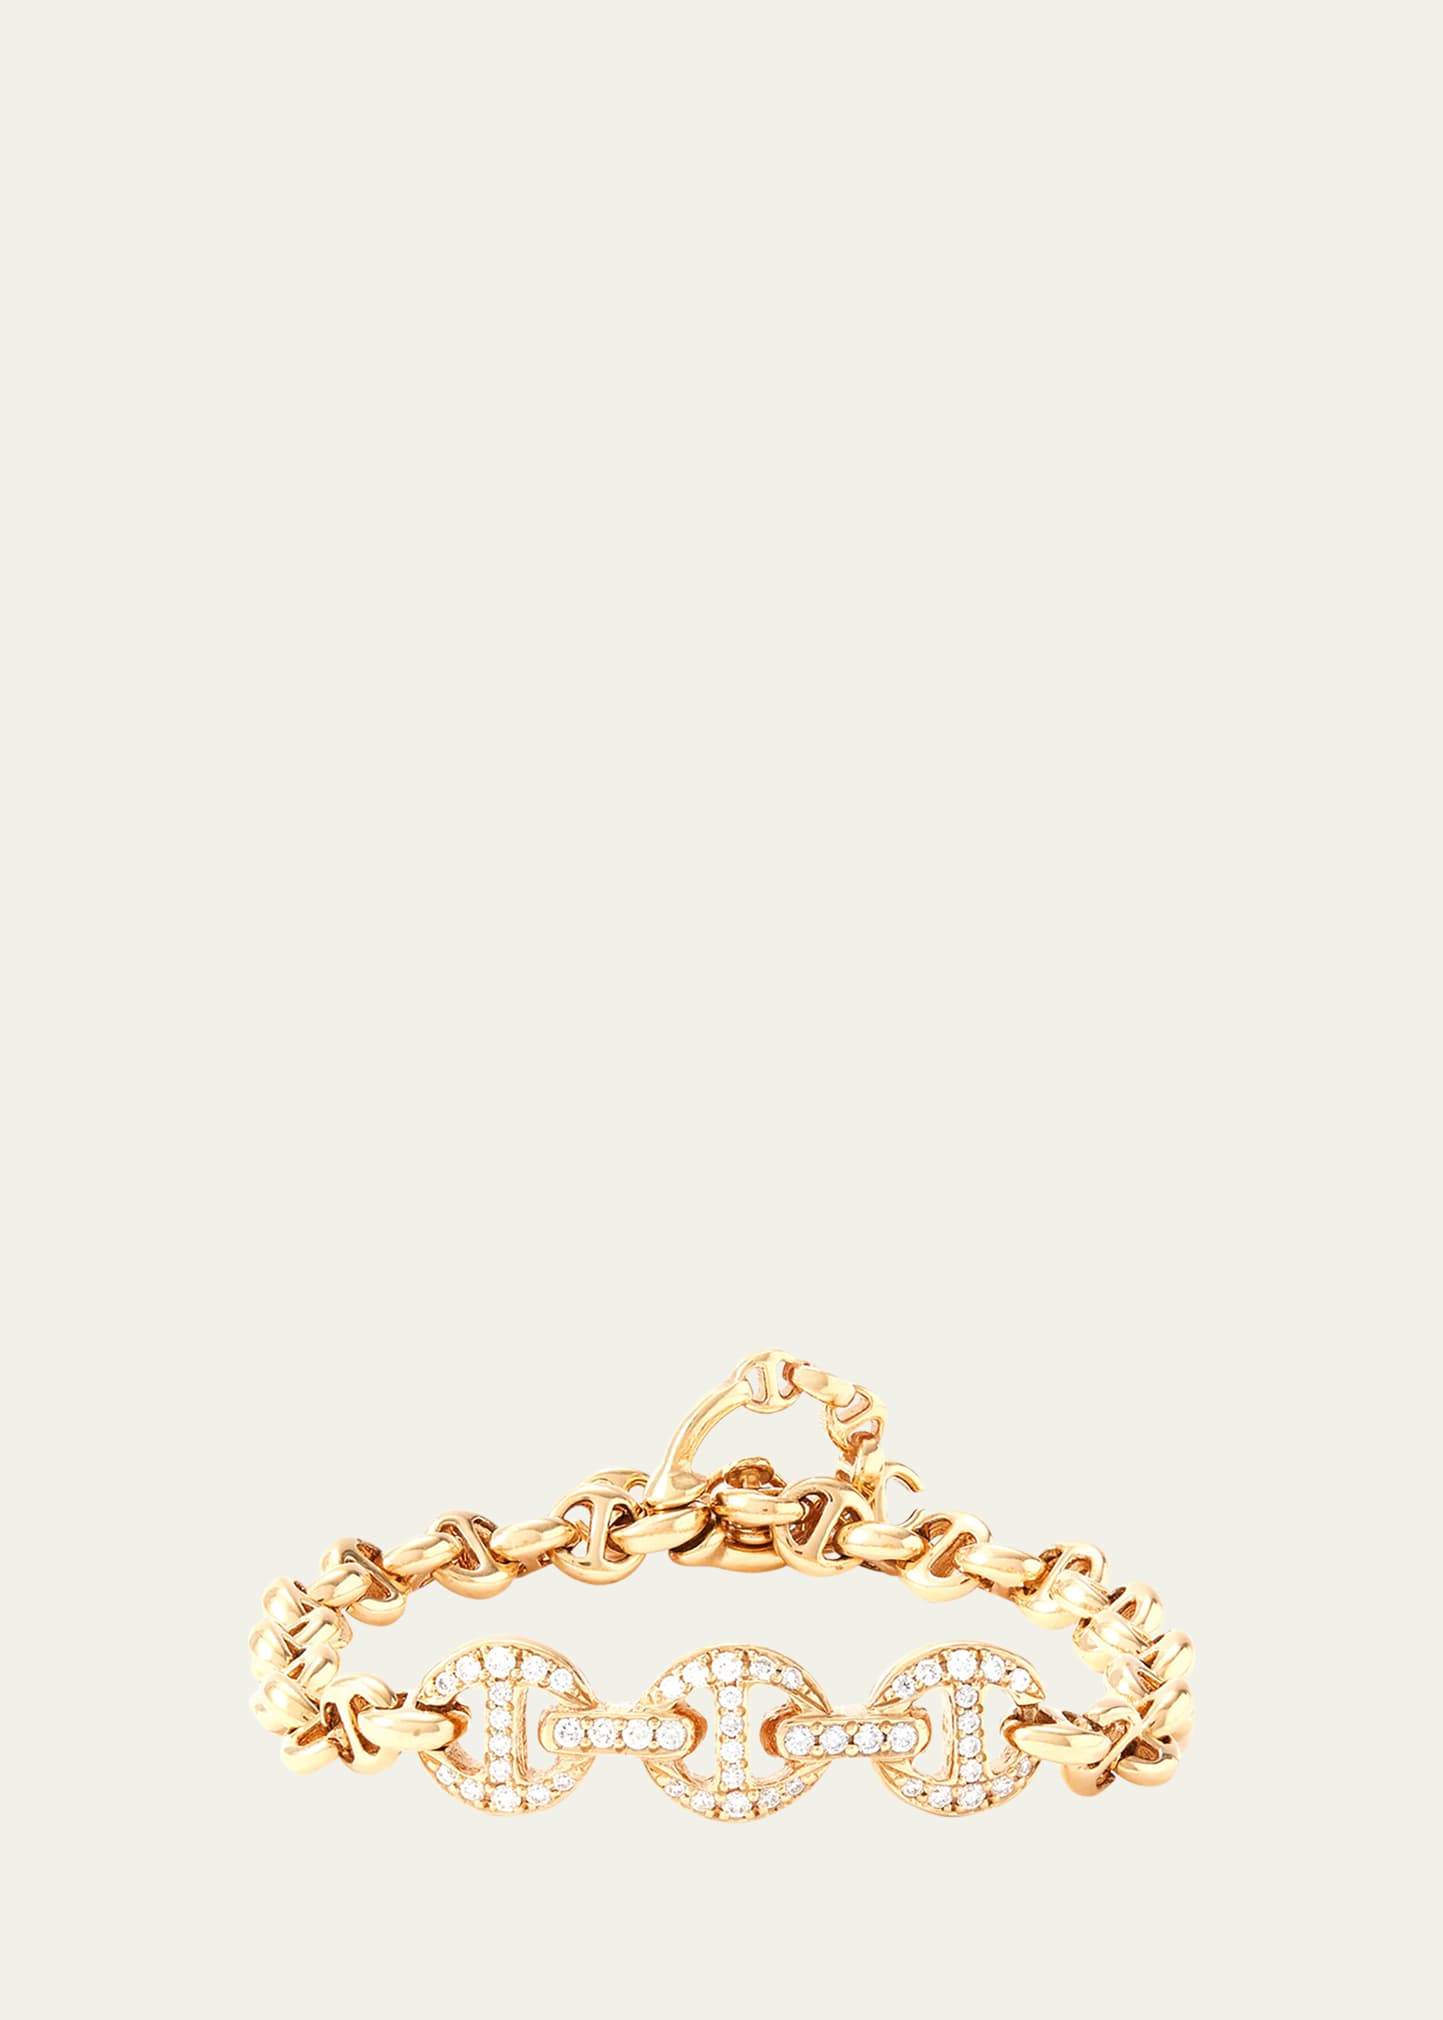 18K Yellow Gold ID Bracelet with White Diamond Pendant and Toggle